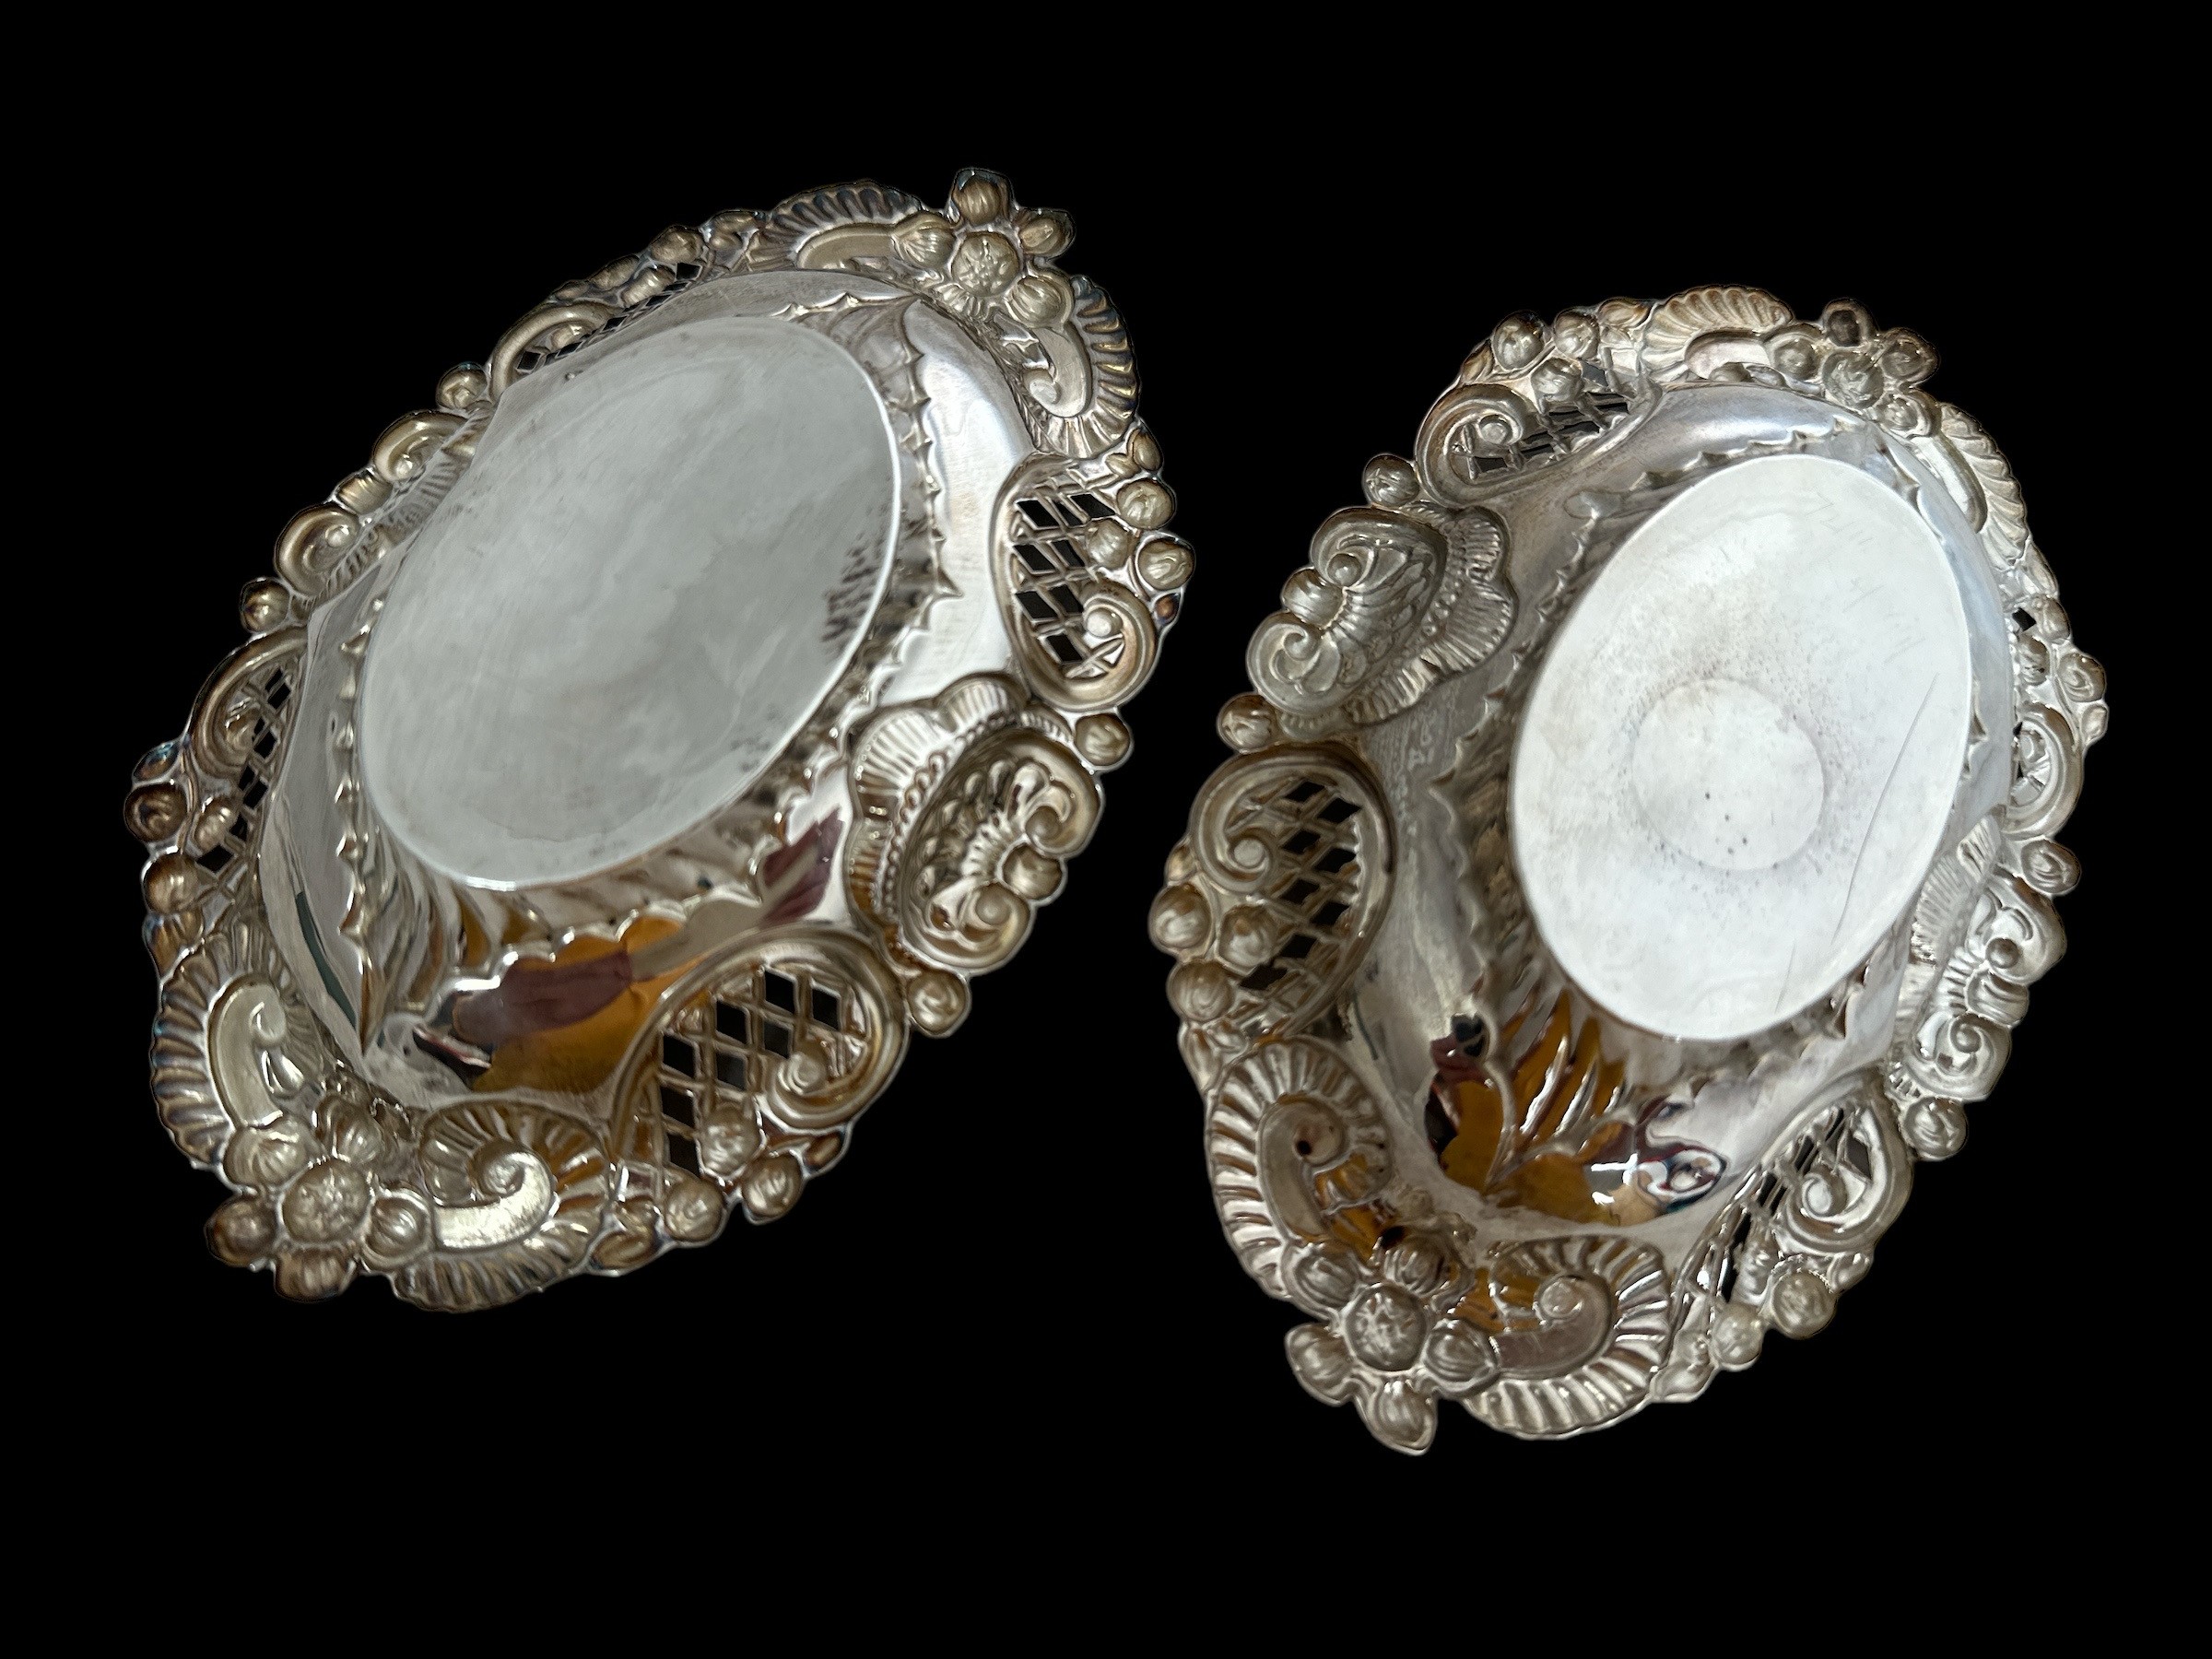 Two bon bon dishes with a filigree design, by Nathan and Hayes, 1898 Chester hallmarks. Weight 67g. - Image 3 of 4